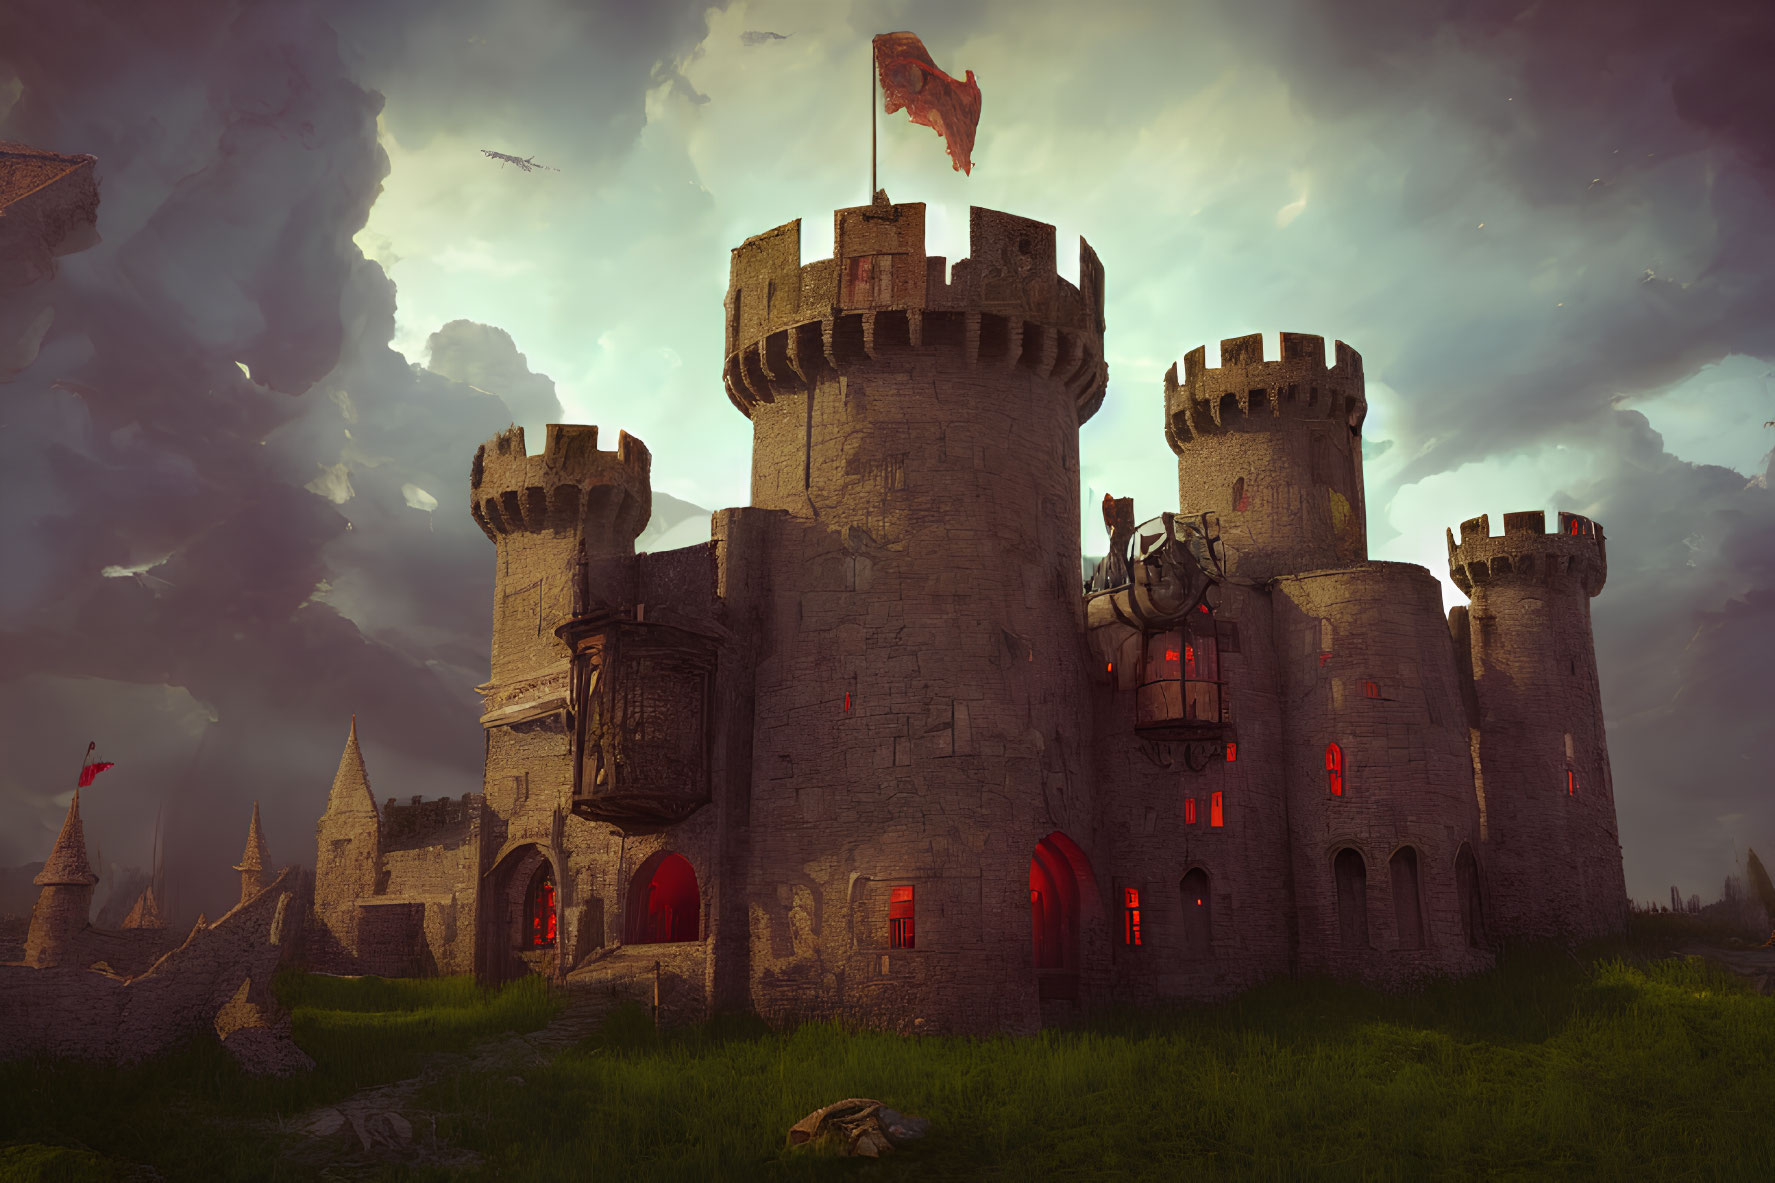 Medieval stone castle with multiple towers and red banners under dramatic sky